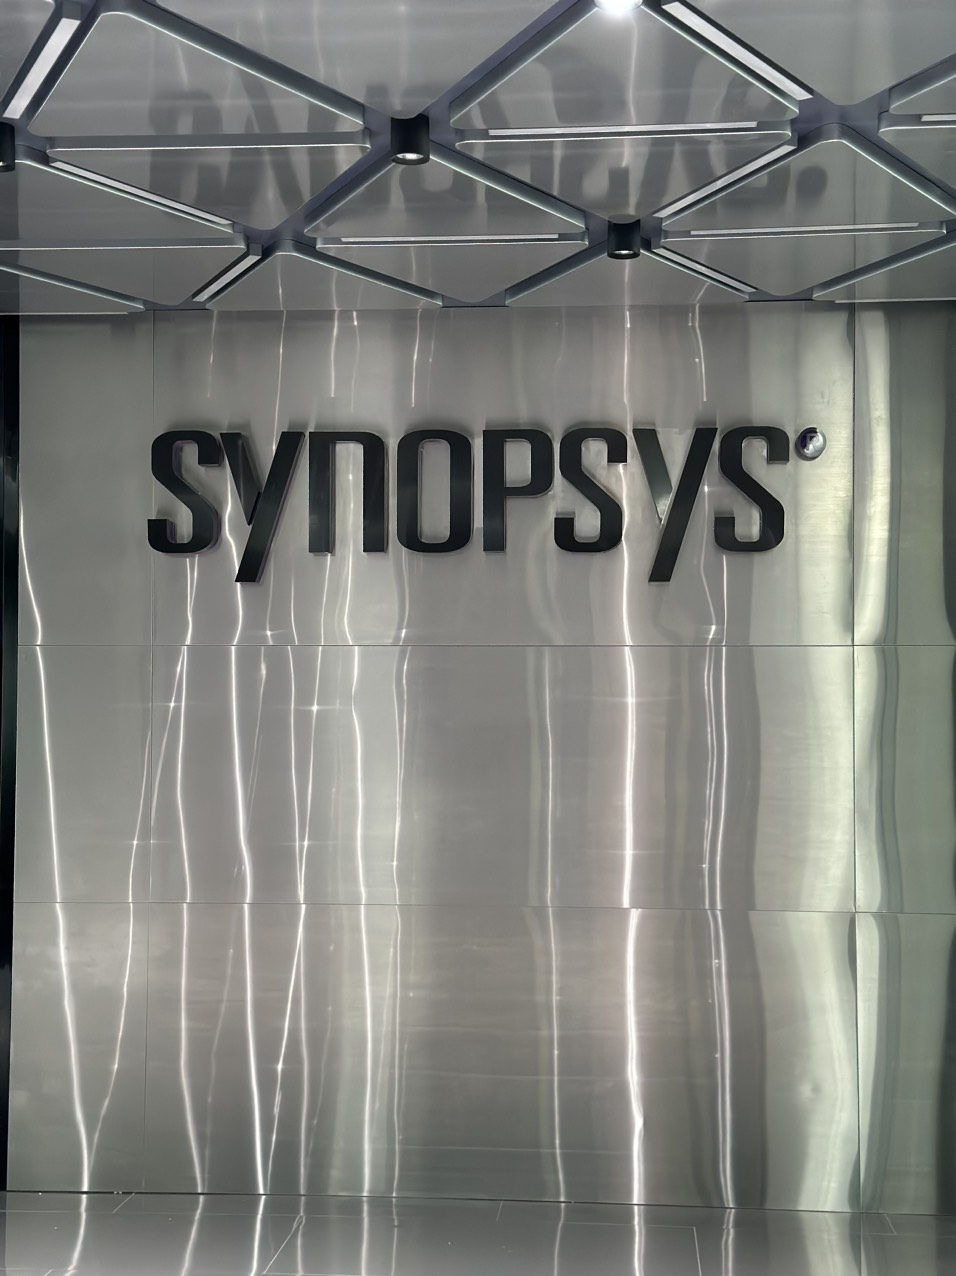 Synopsys Inc. Price Prediction: Can SNPS Stock Price Fall Soon?